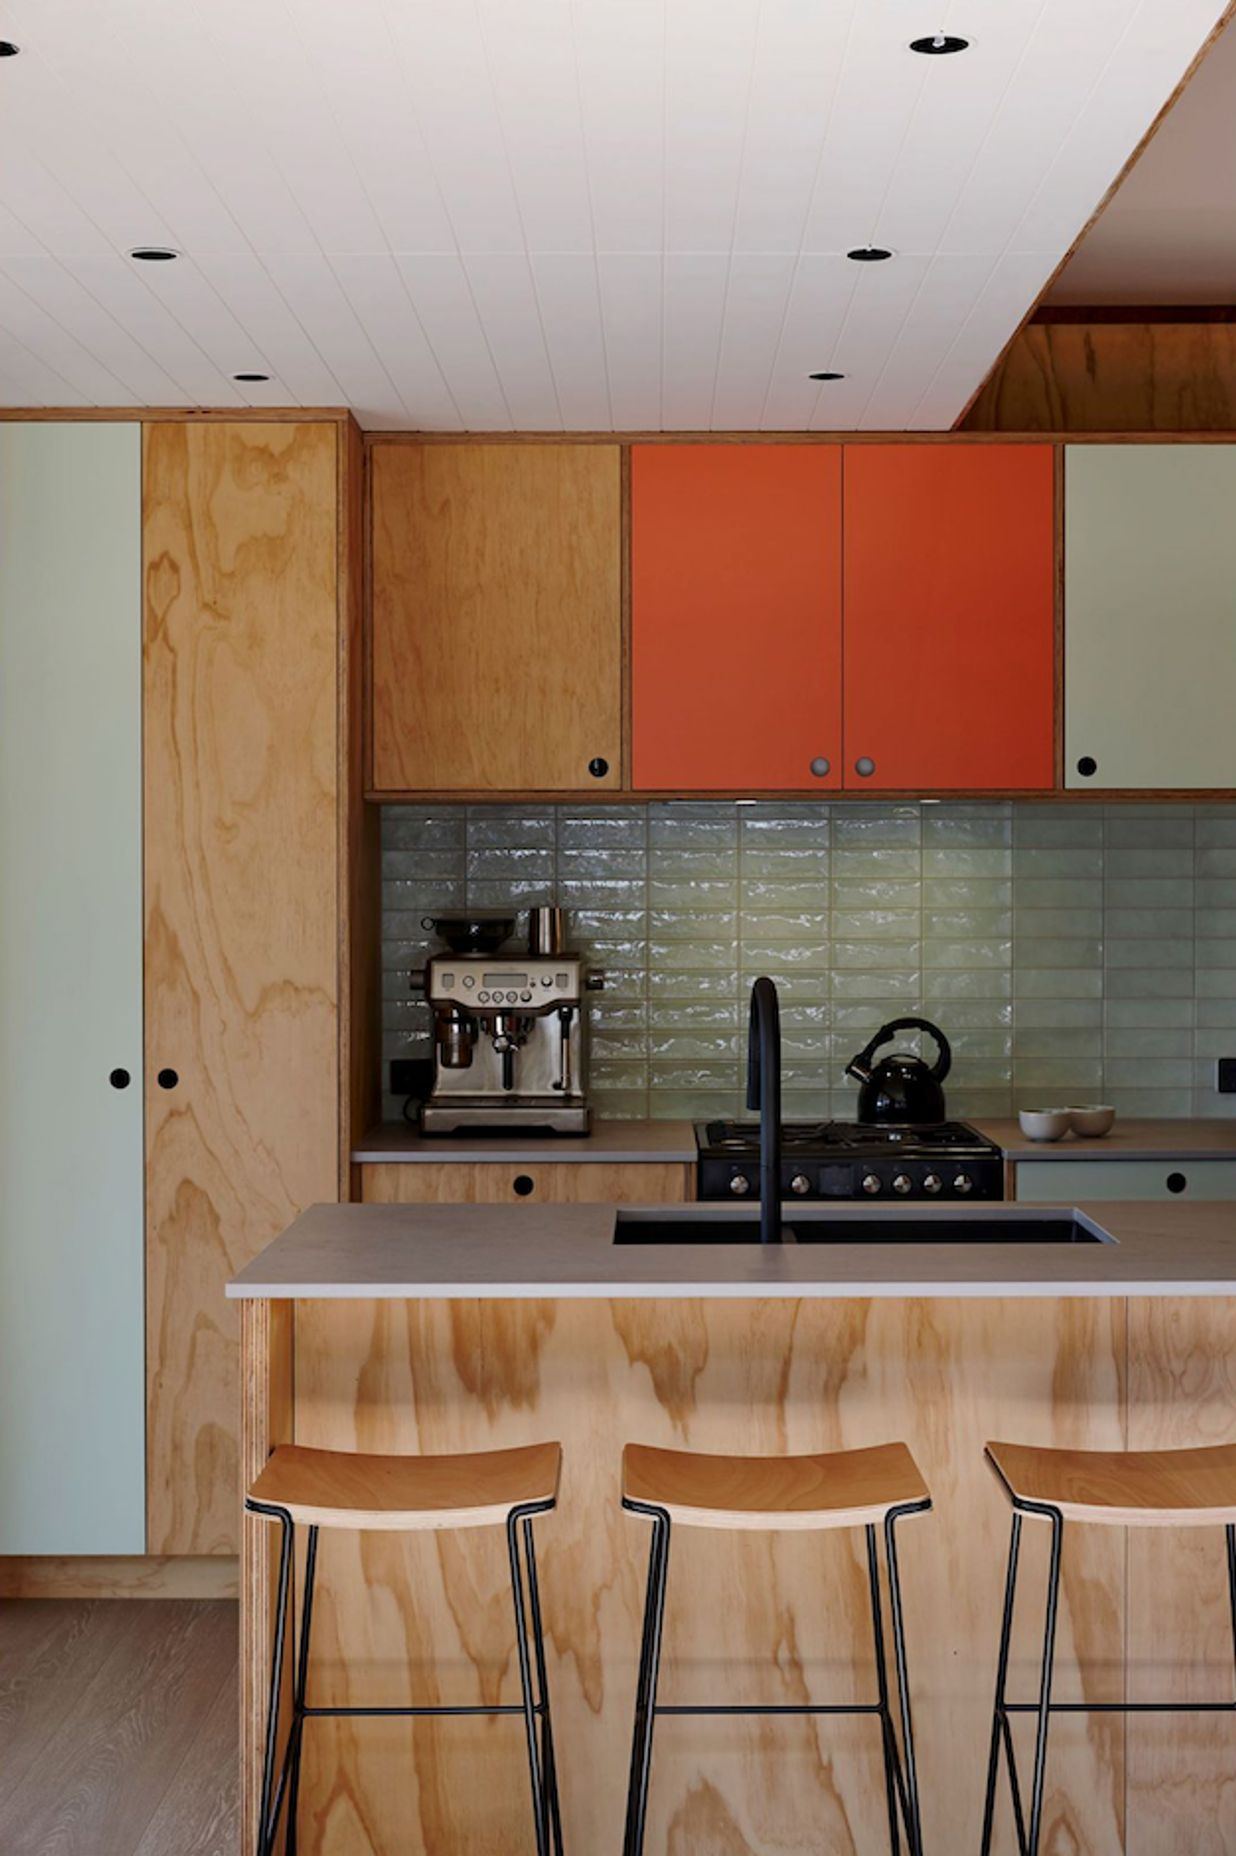 Ply is the dominant material throughout the interior, and is peppered with happy colour.